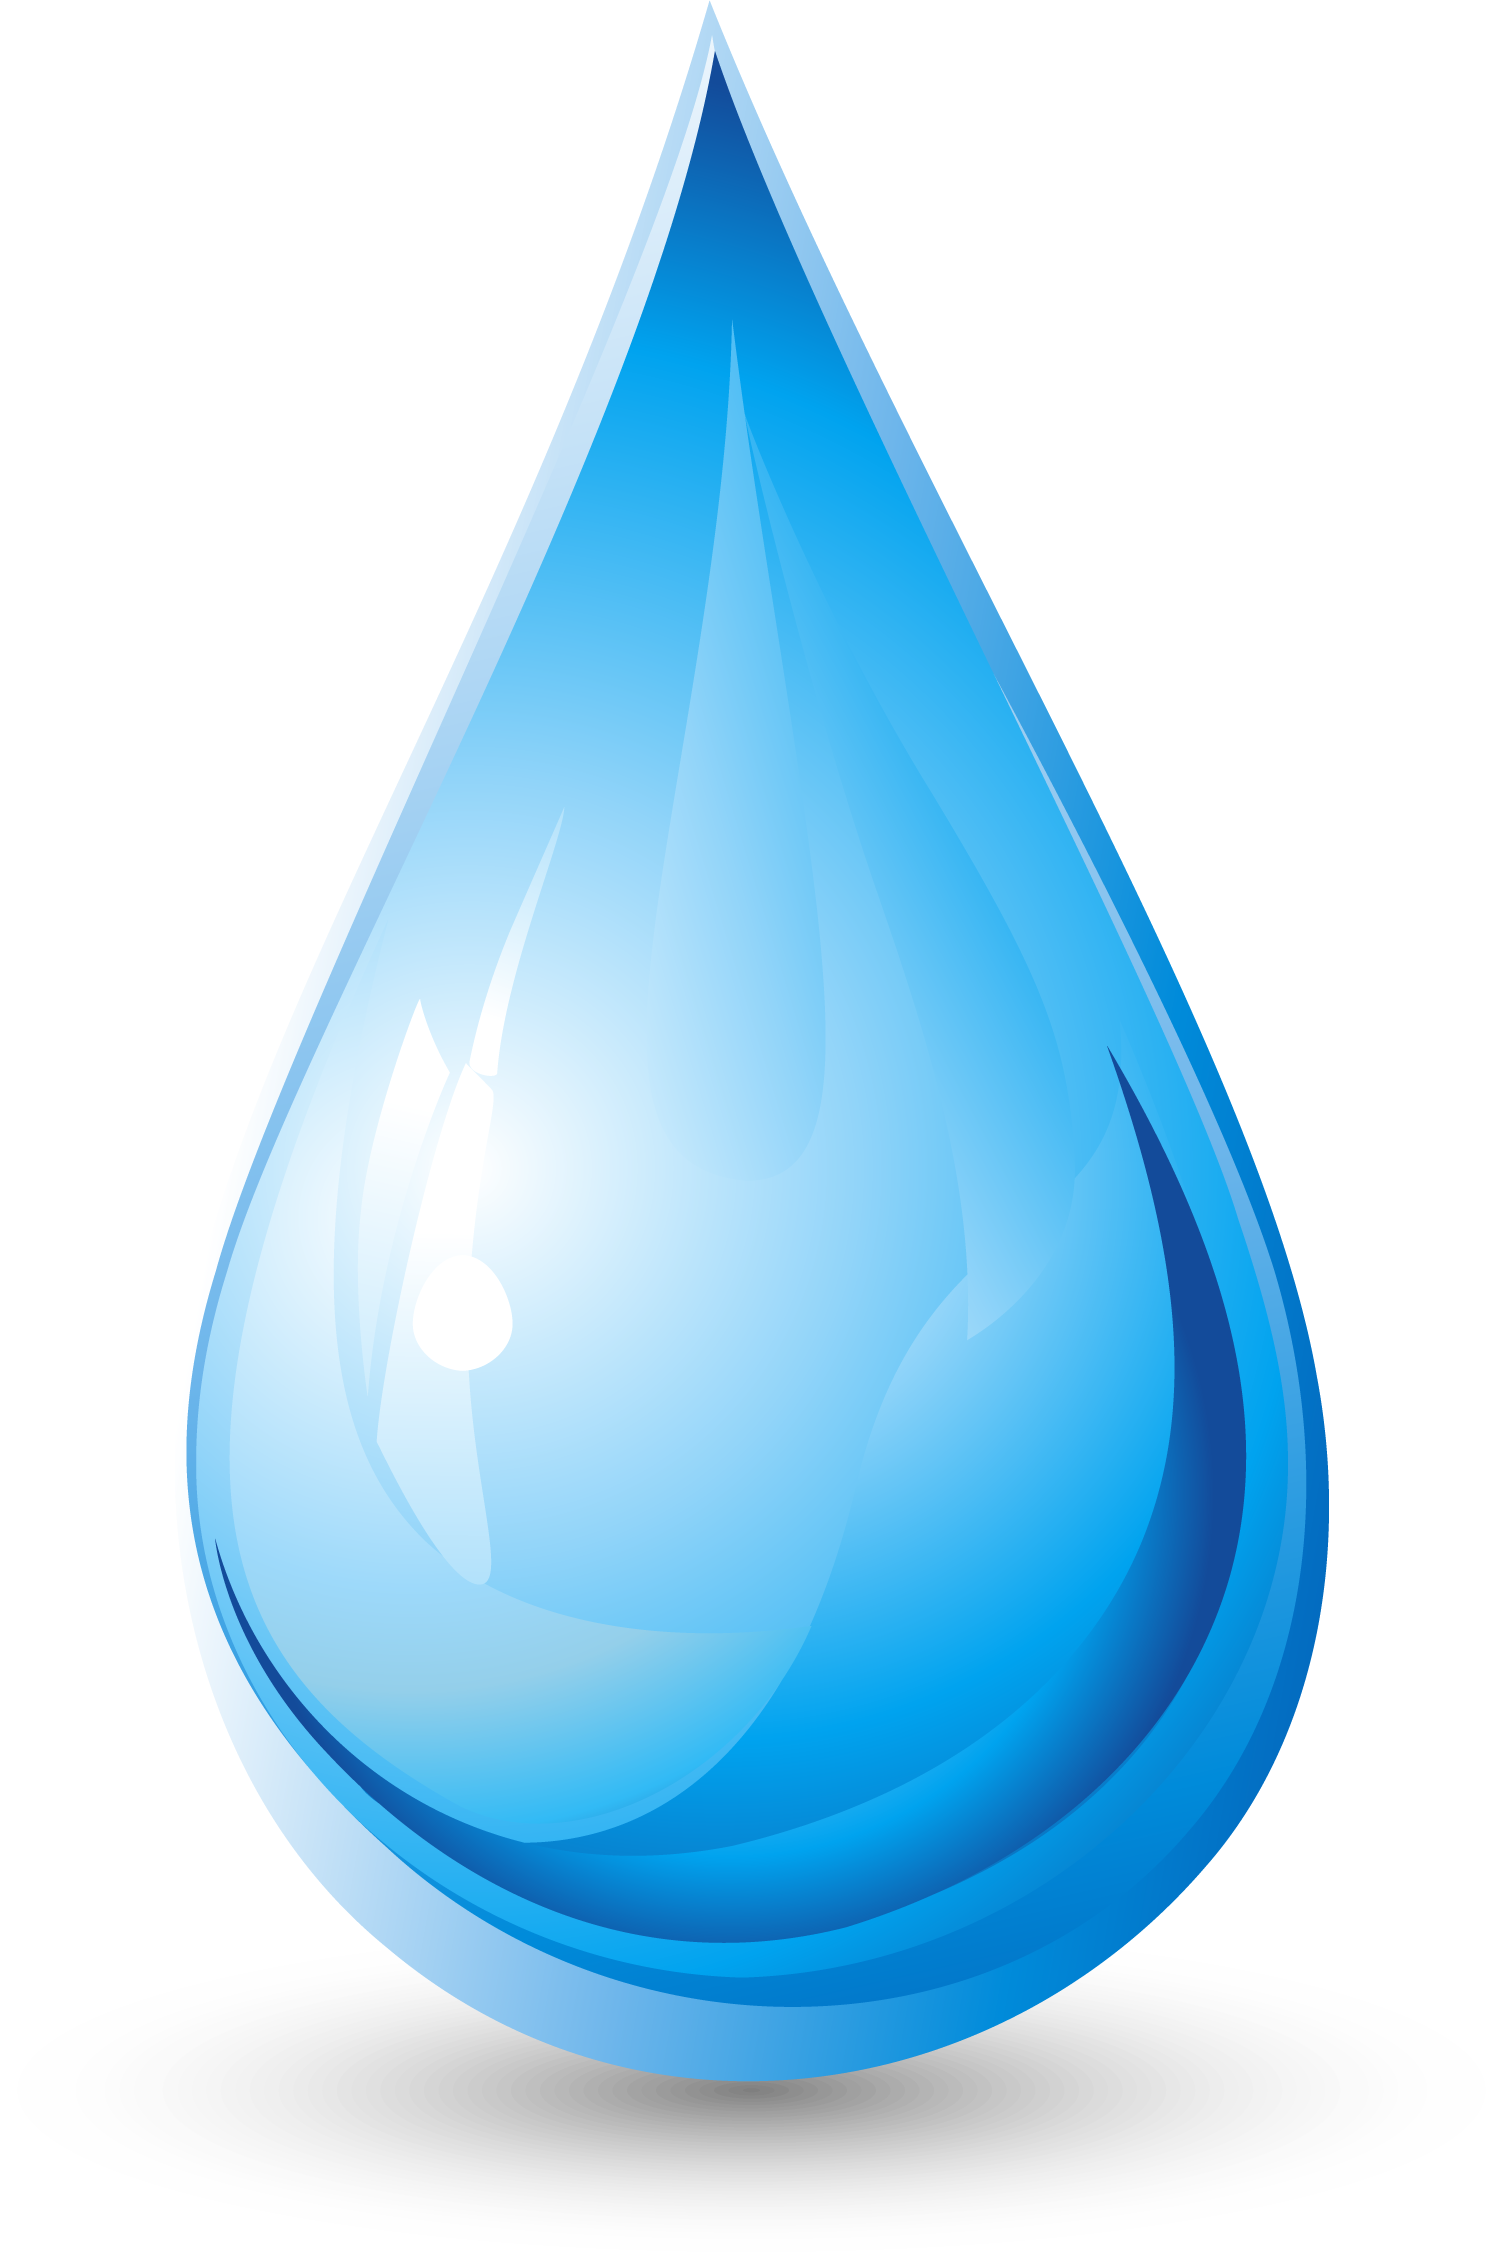 Blue-Water-Drops-PNG-Image